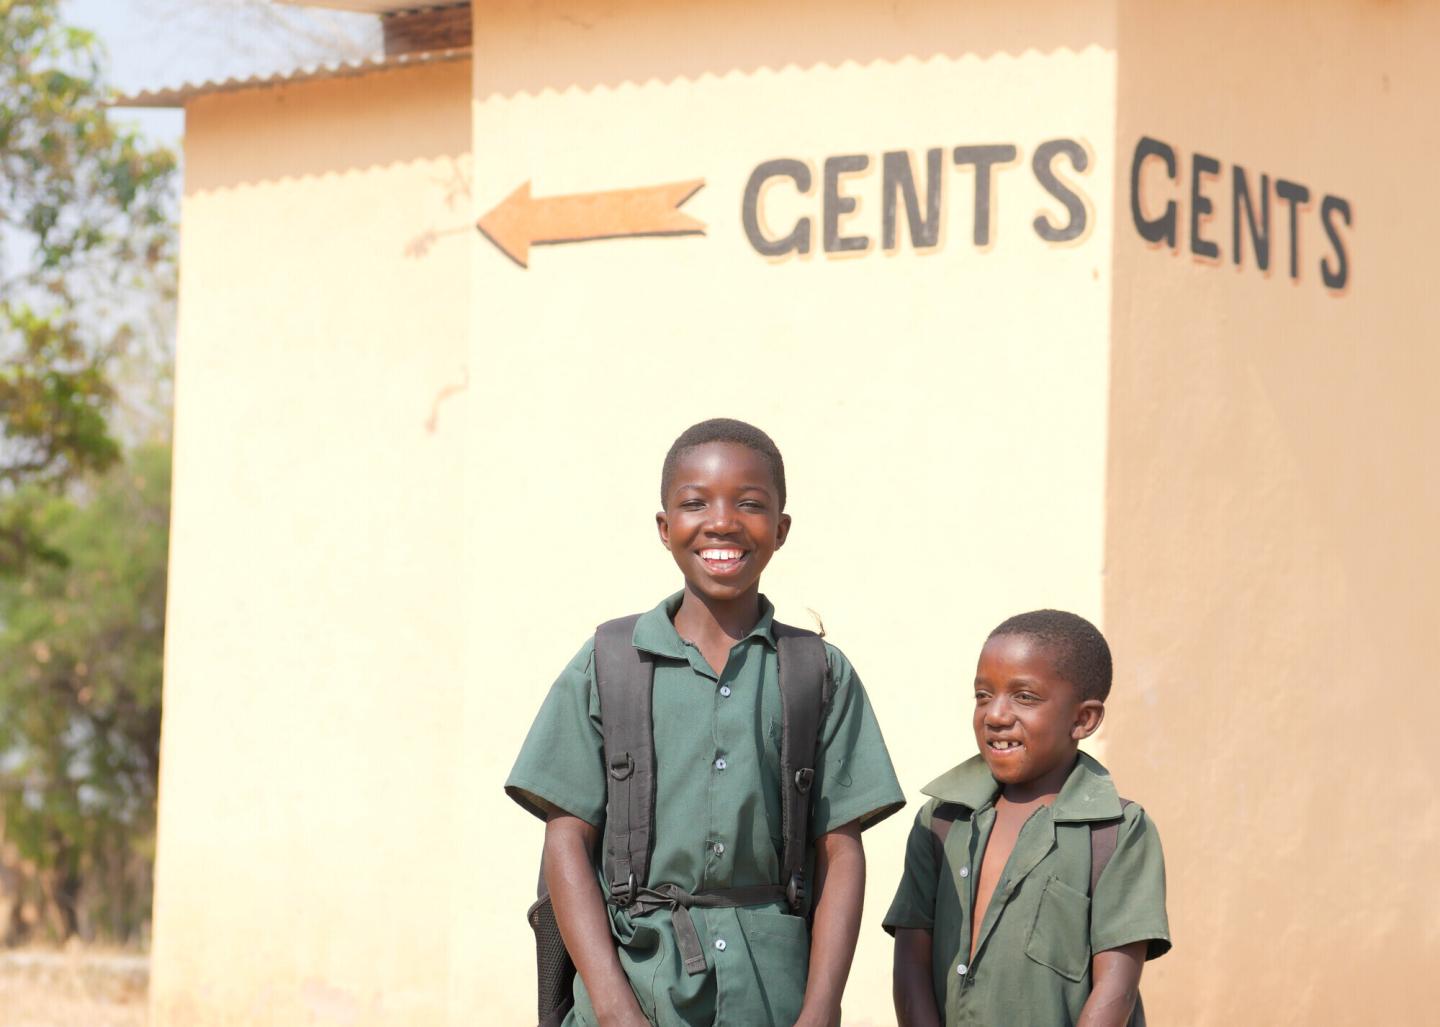 Two students in green stand in front of a latrine that says "Gents"